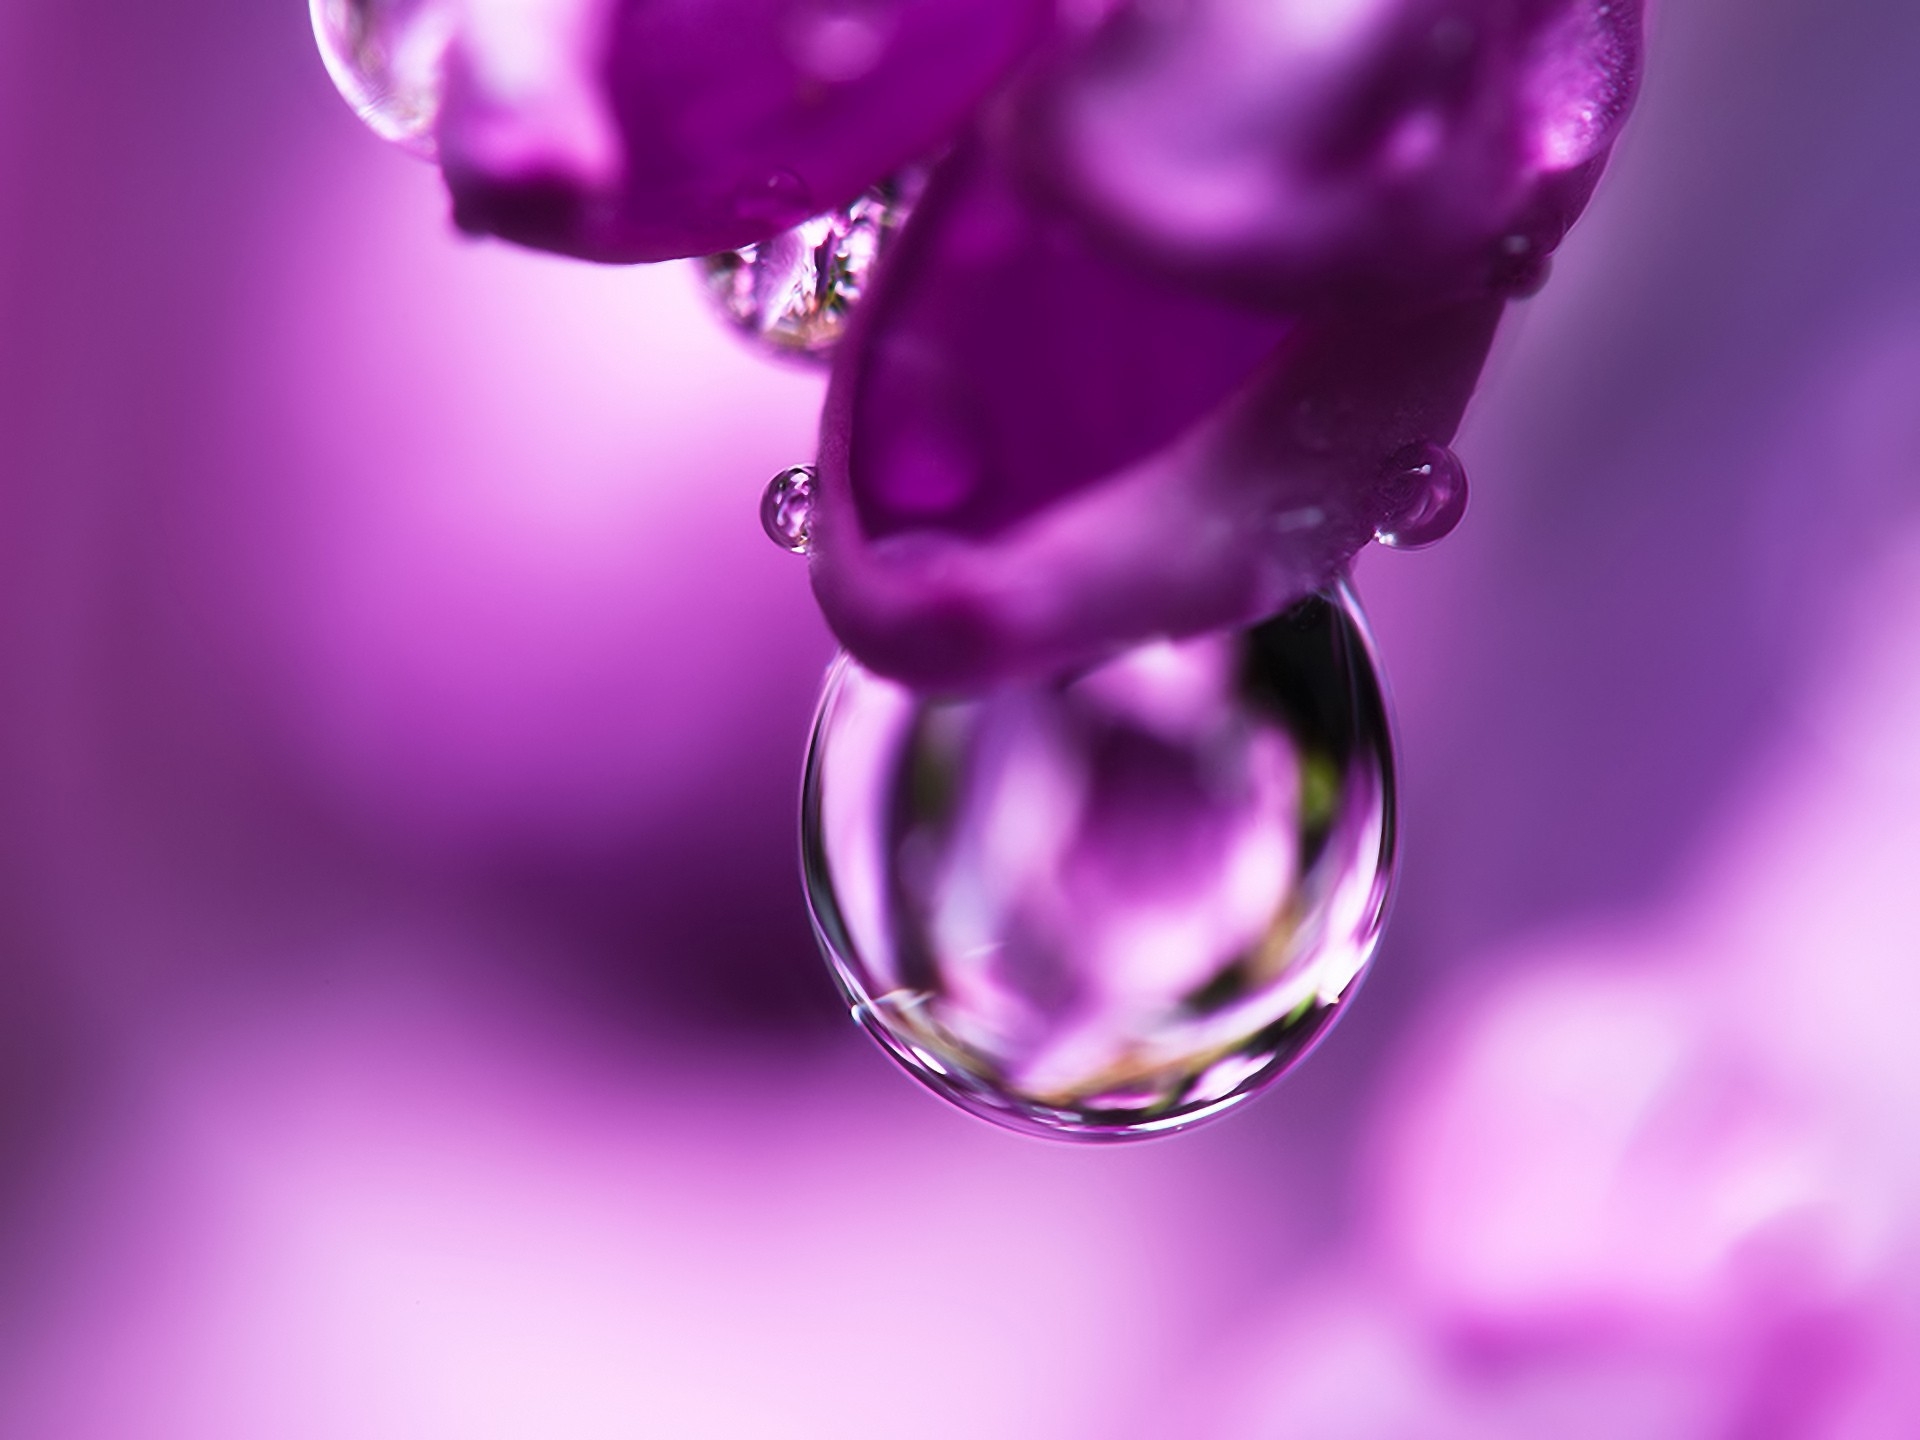 122055 3840x2160 PC pictures for free, download petal, lilac, drop, flower 3840x2160 wallpapers on your desktop